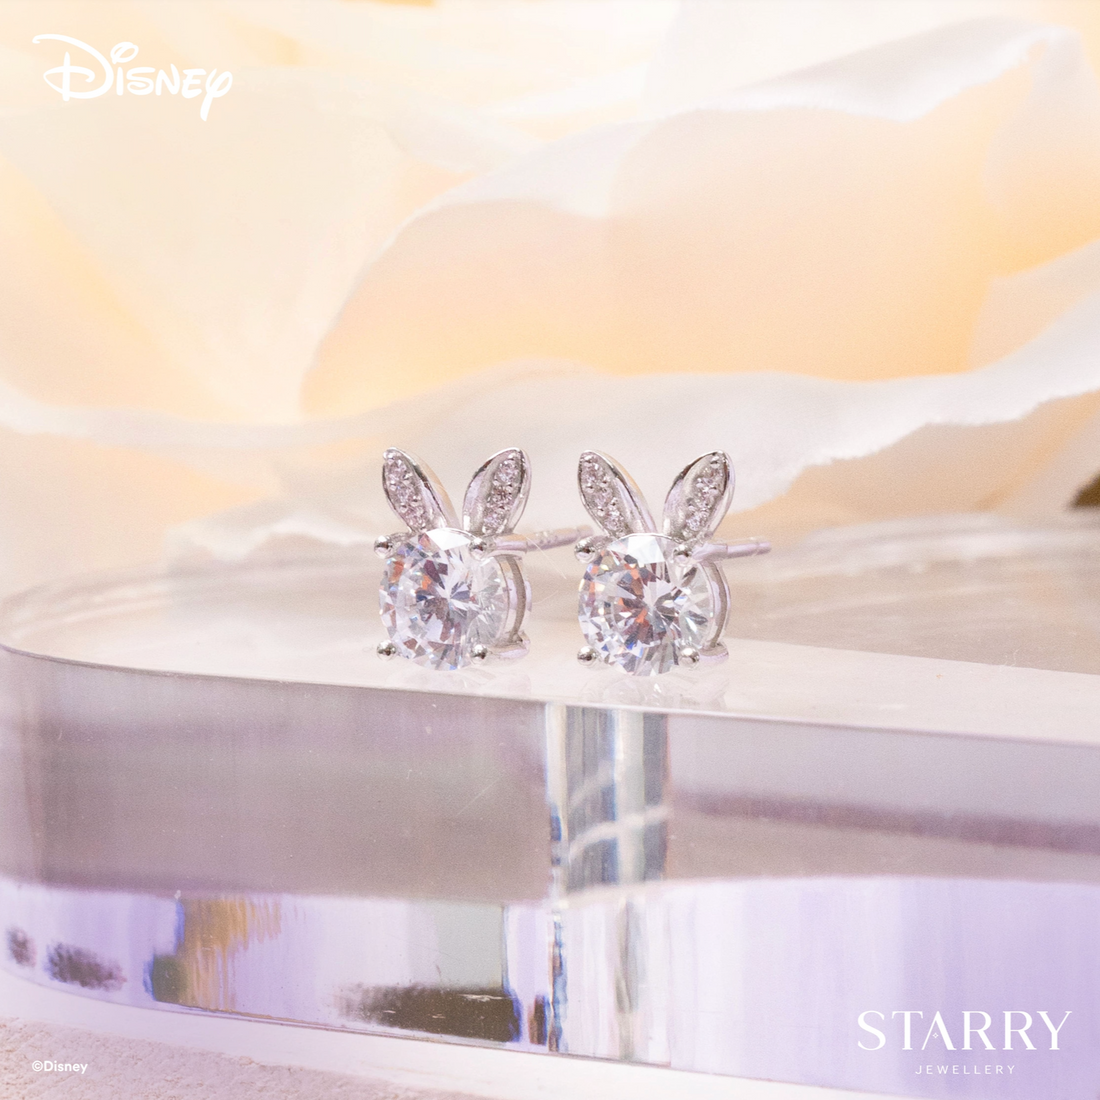 THUMPER SOLITAIRE STUDS